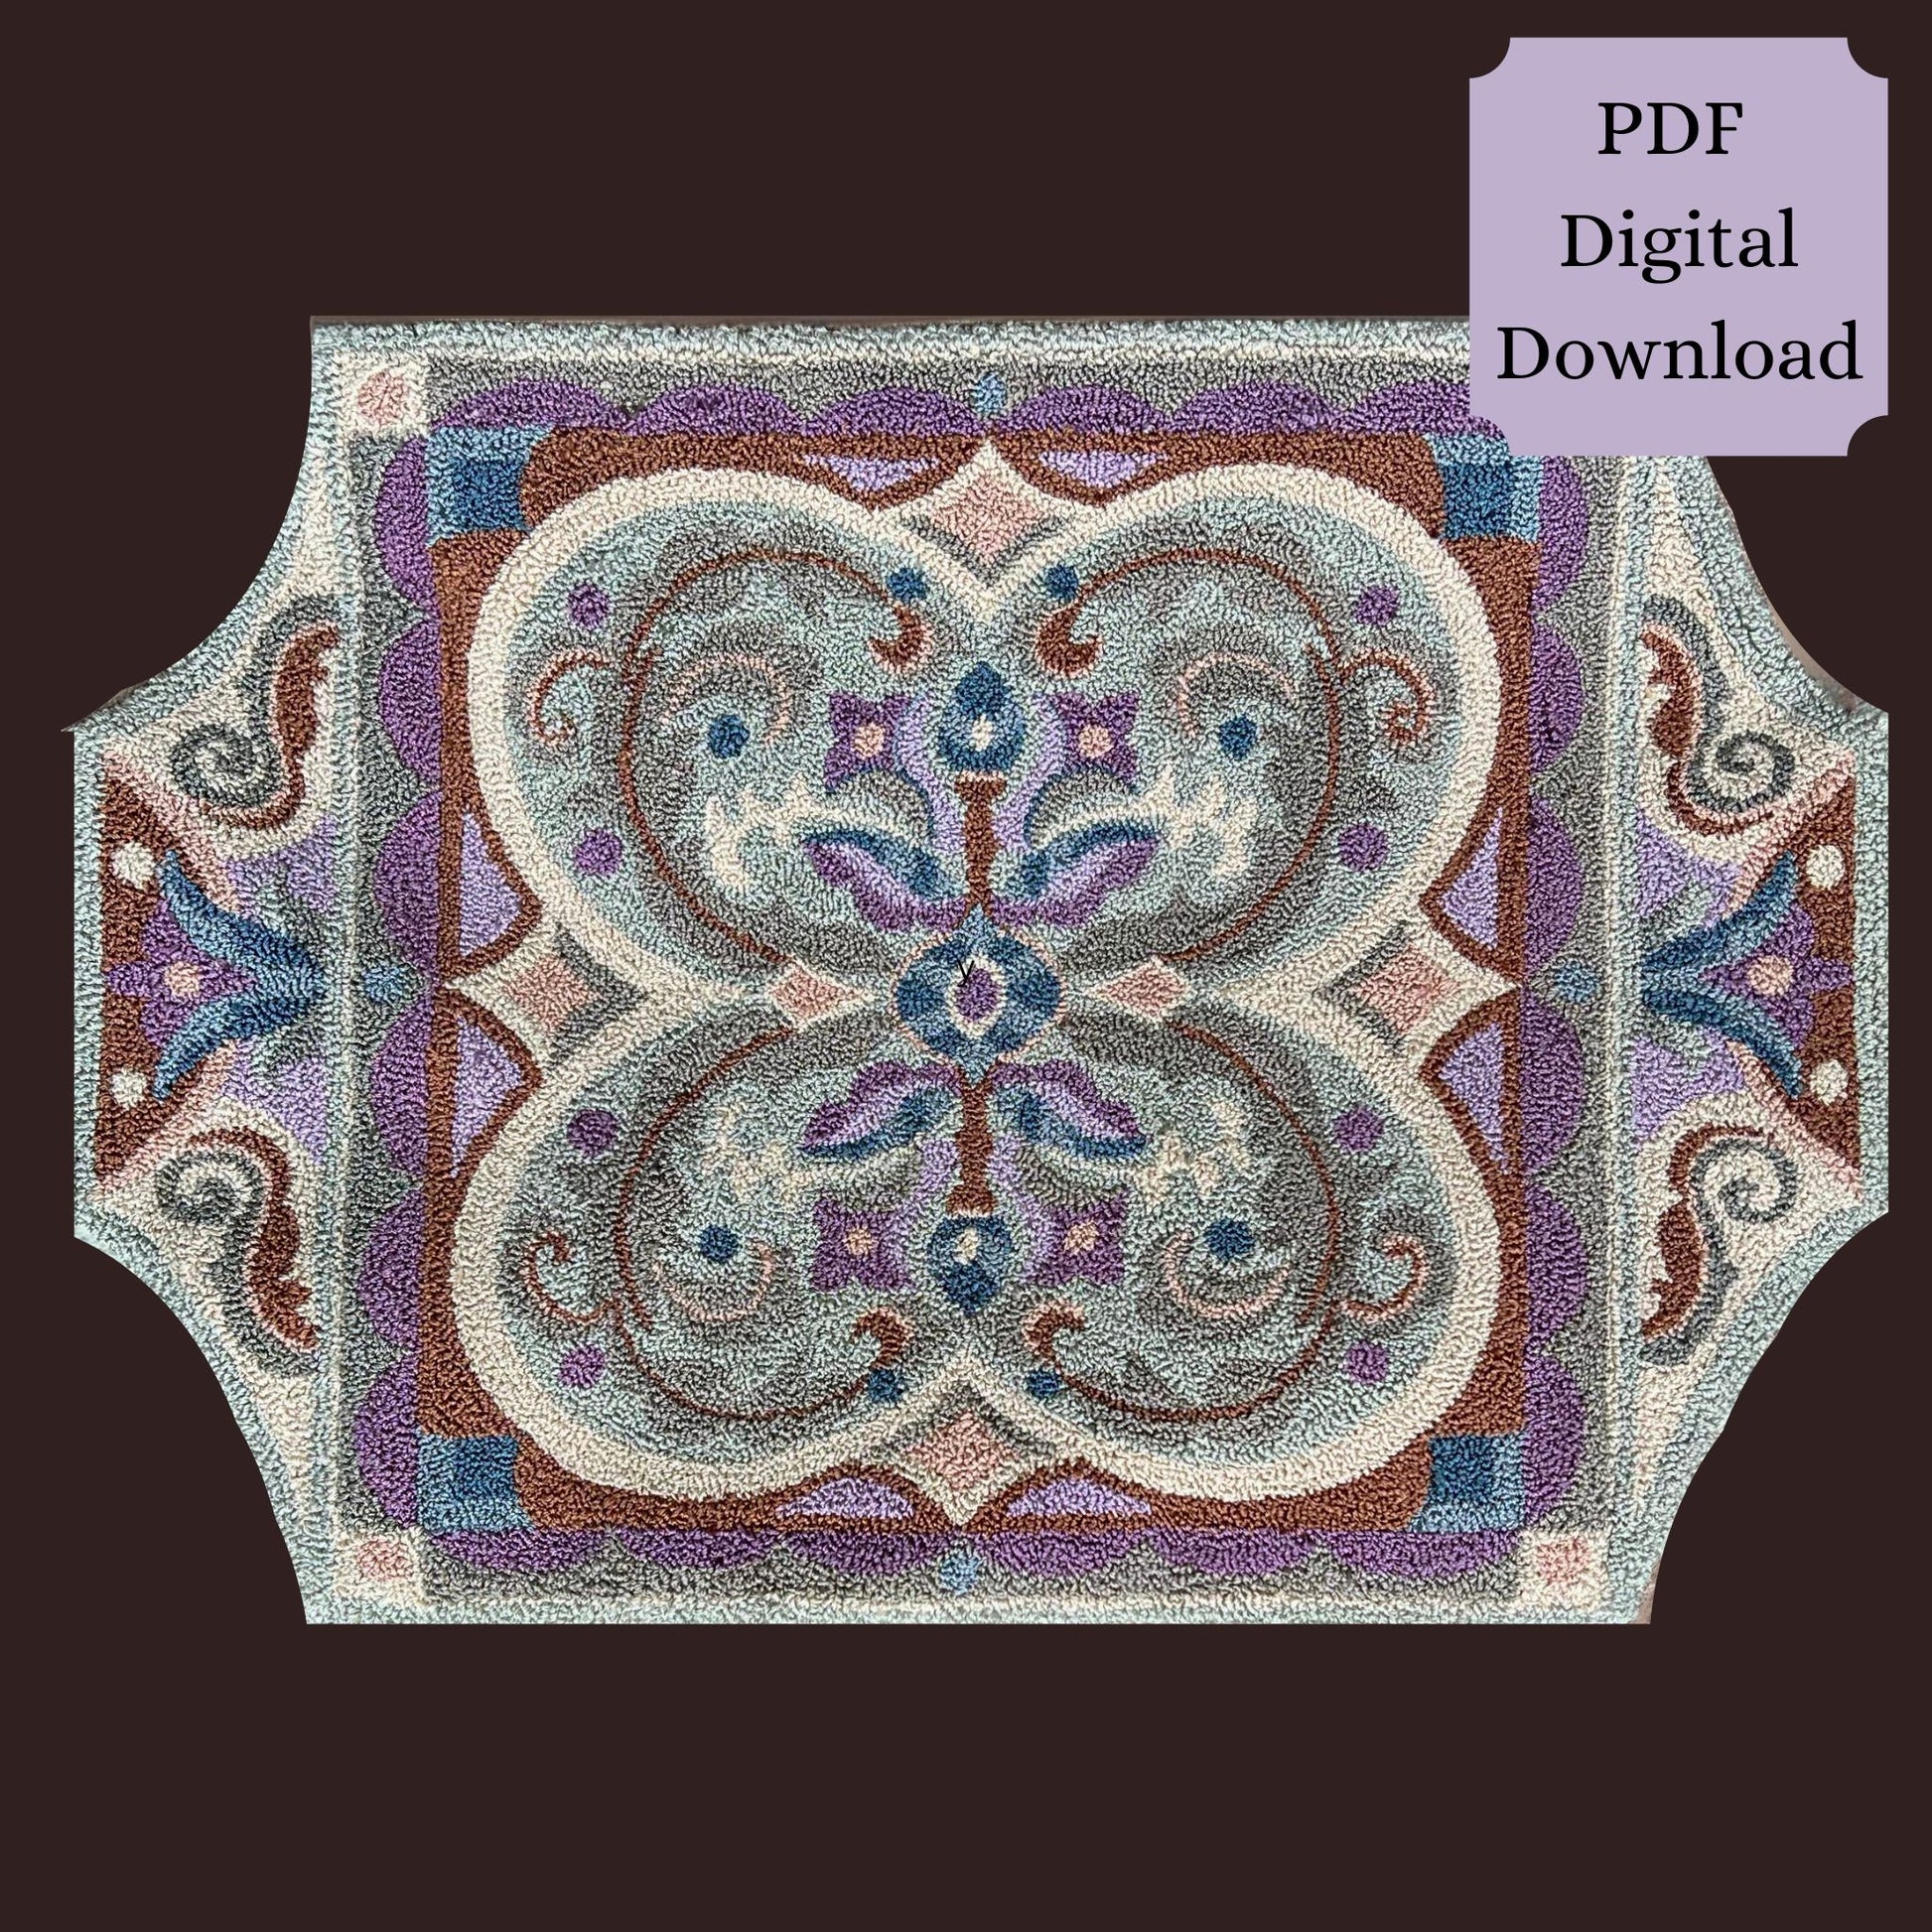  Misty Lavender- PDF Rug Hooking Digital Download Pattern by Orphaned Wool. This is a 5 page download pattern file of a lovely detail rug hooking pattern, size suggestion and helpful information is included in this download. Copyright © 2023 Kelly Kanyok